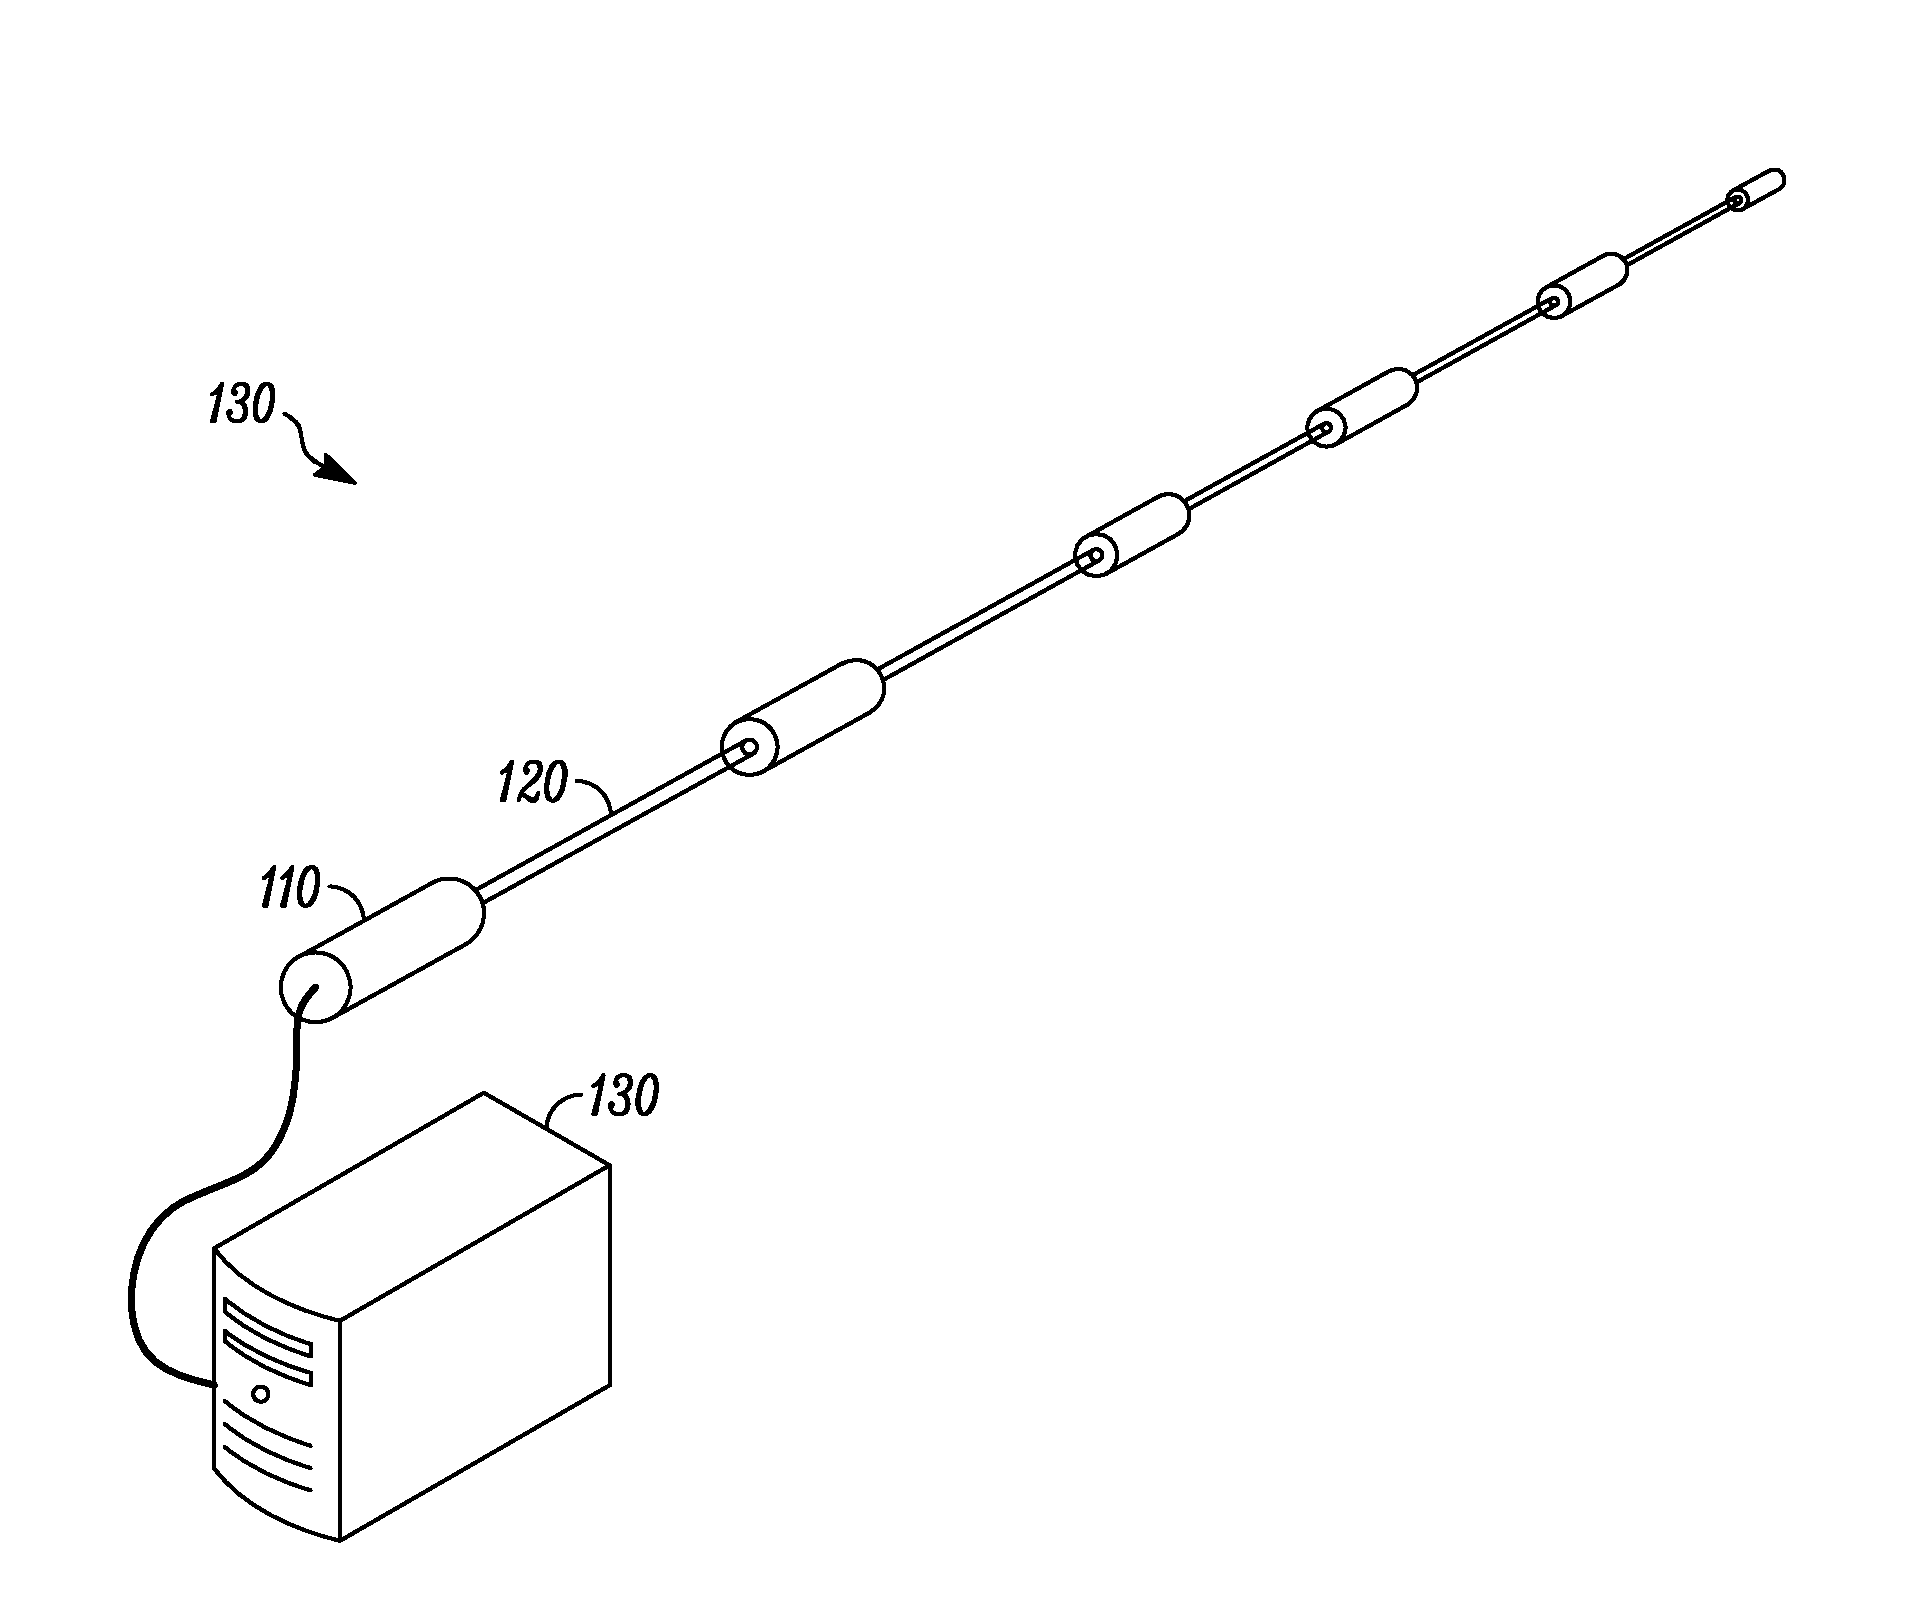 Context aware multiple-input and multiple-output antenna systems and methods